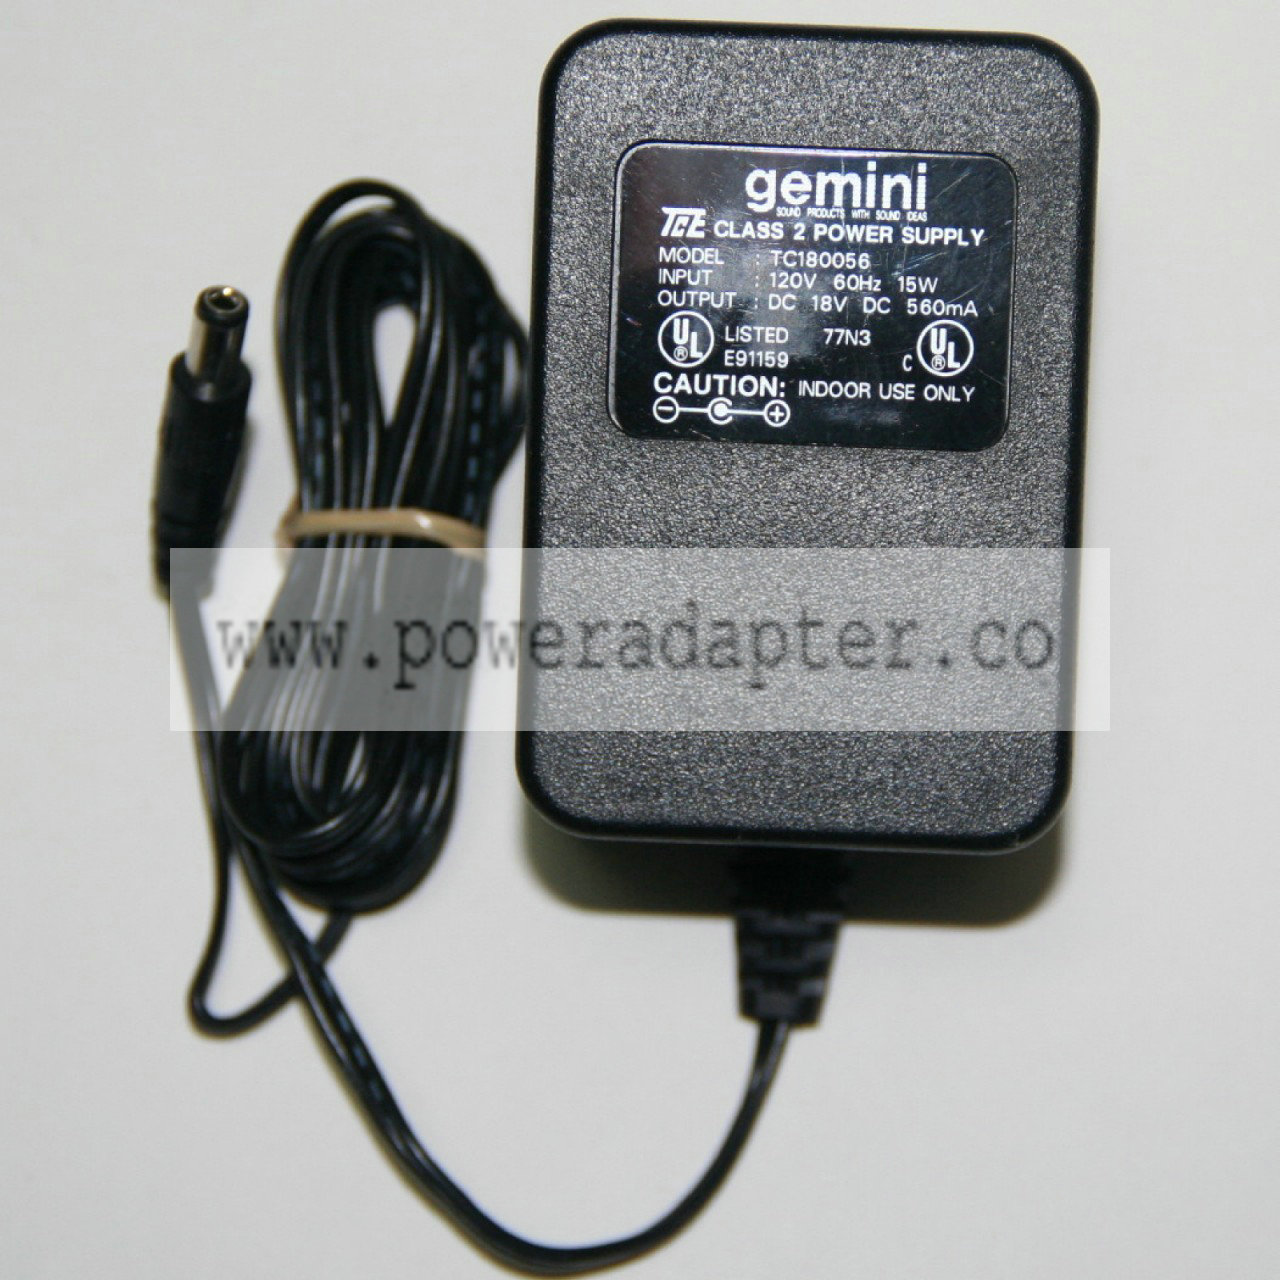 Gemini Replacement Power Supply 18 Volt DC Output Product Description Gemini Replacement Power Supply 18DC 560mA positi